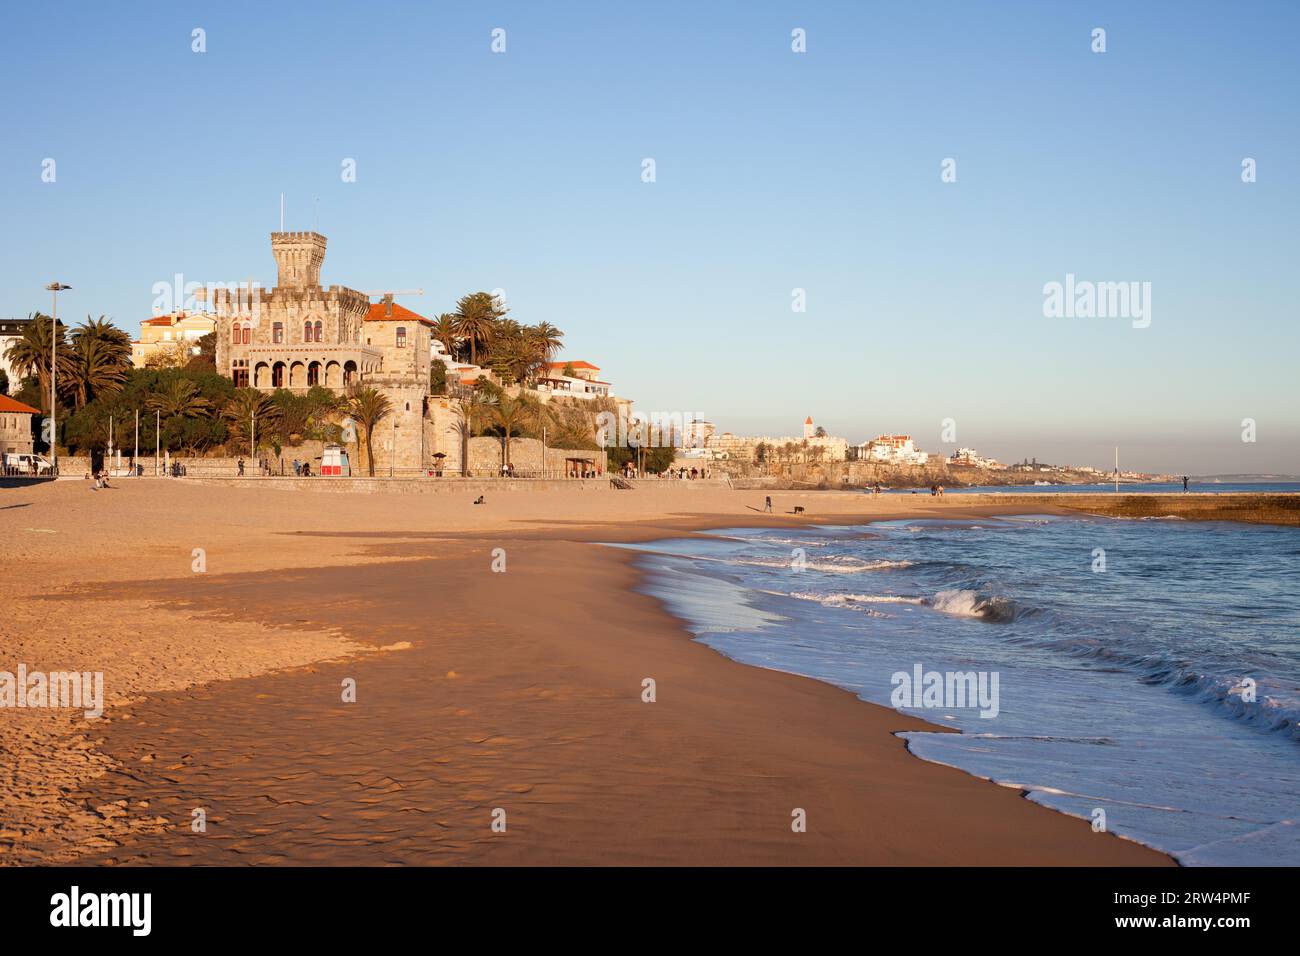 Tamariz Beach overlooked by a castle in resort town of Estoril, near Lisbon in Portugal Stock Photo